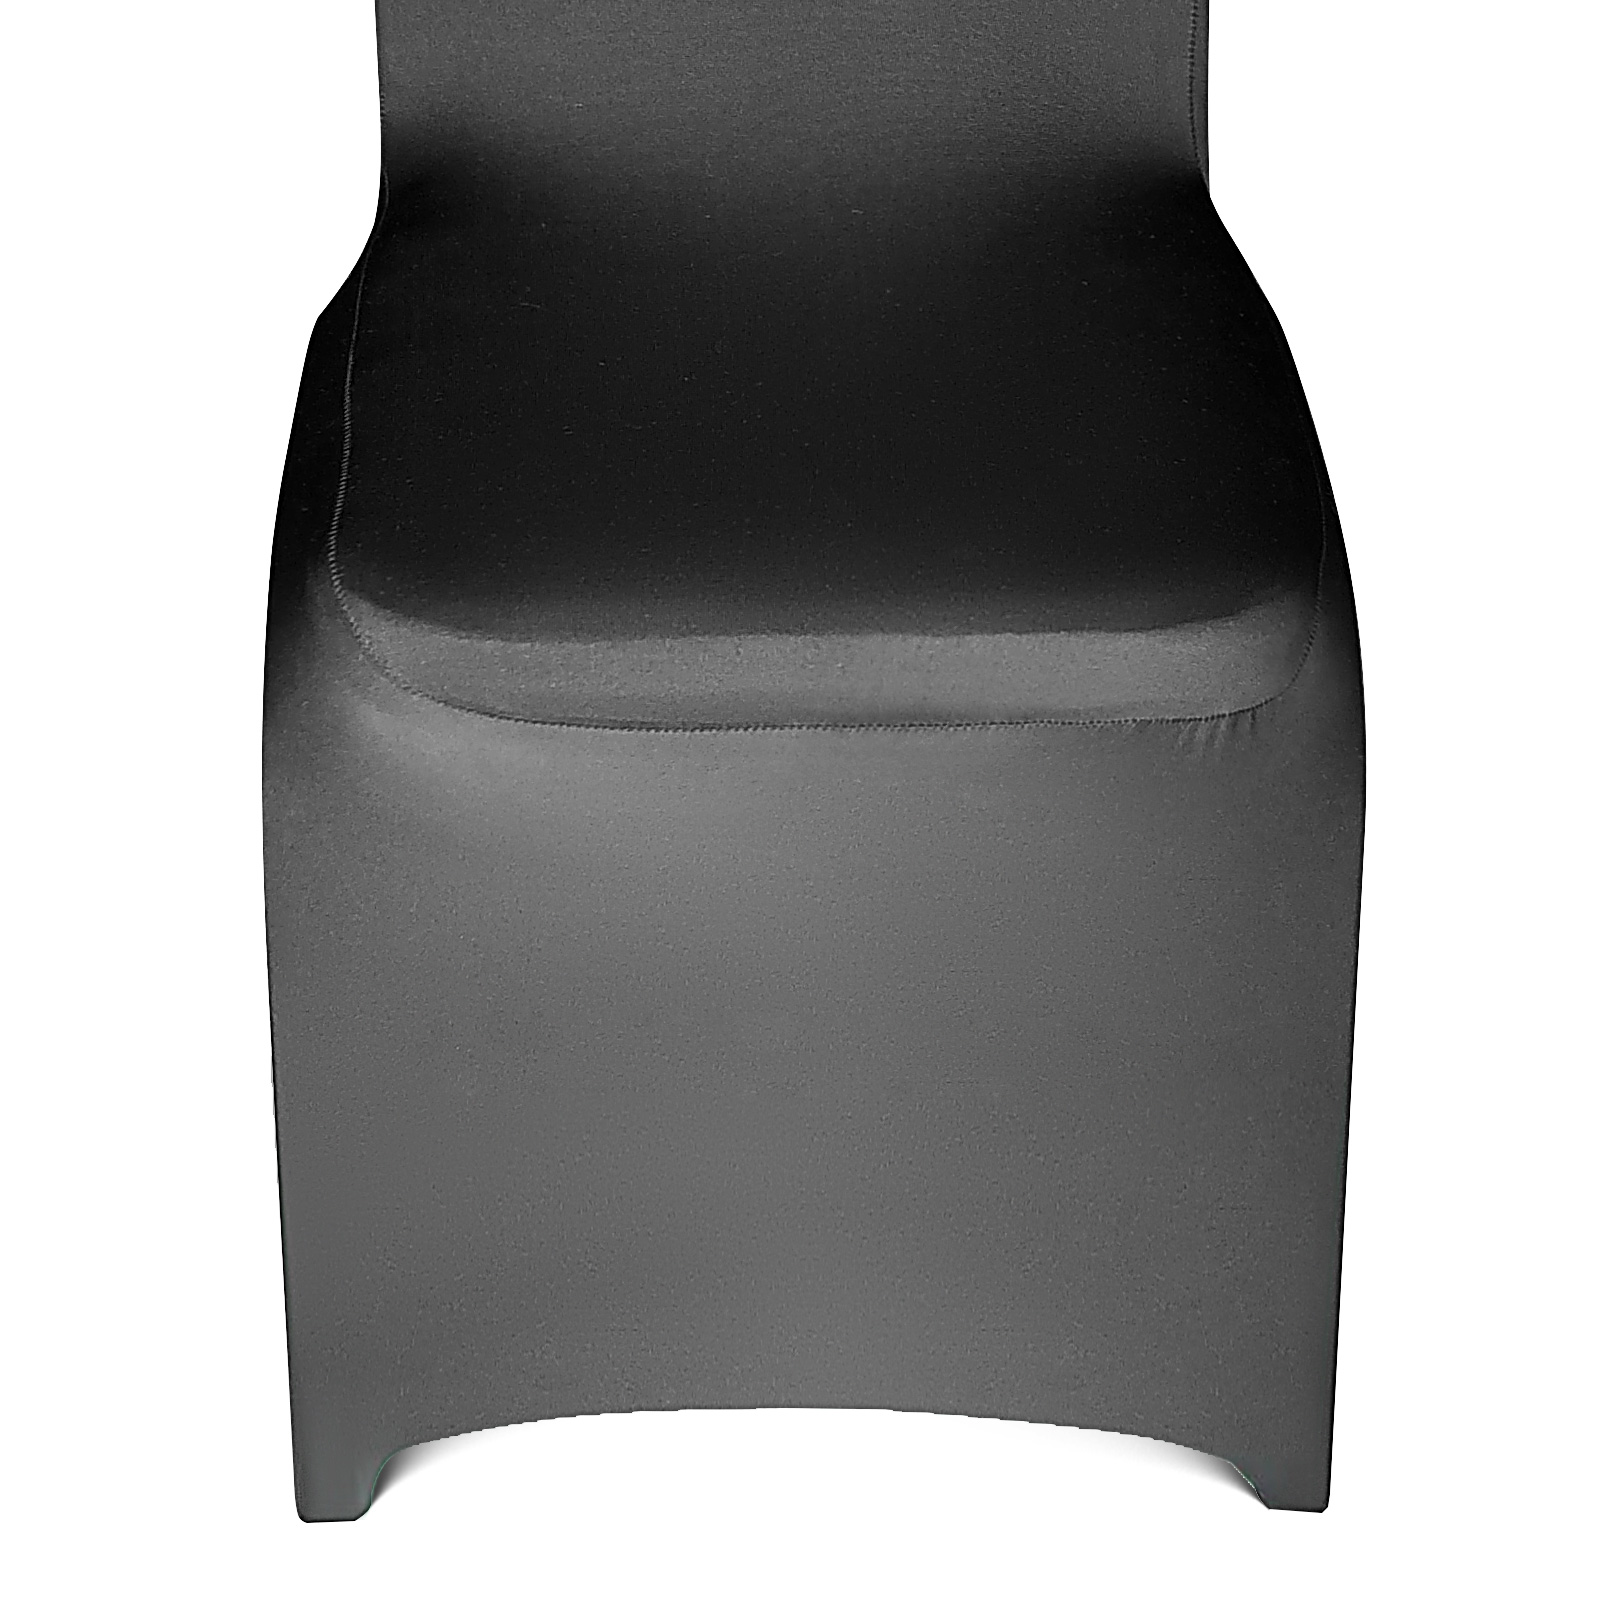 Buy Black Premium Milan Ruched Spandex Banquet Chair Covers - Clearance  SALE - Case of 100 Chair Covers at Tablecloth Factory